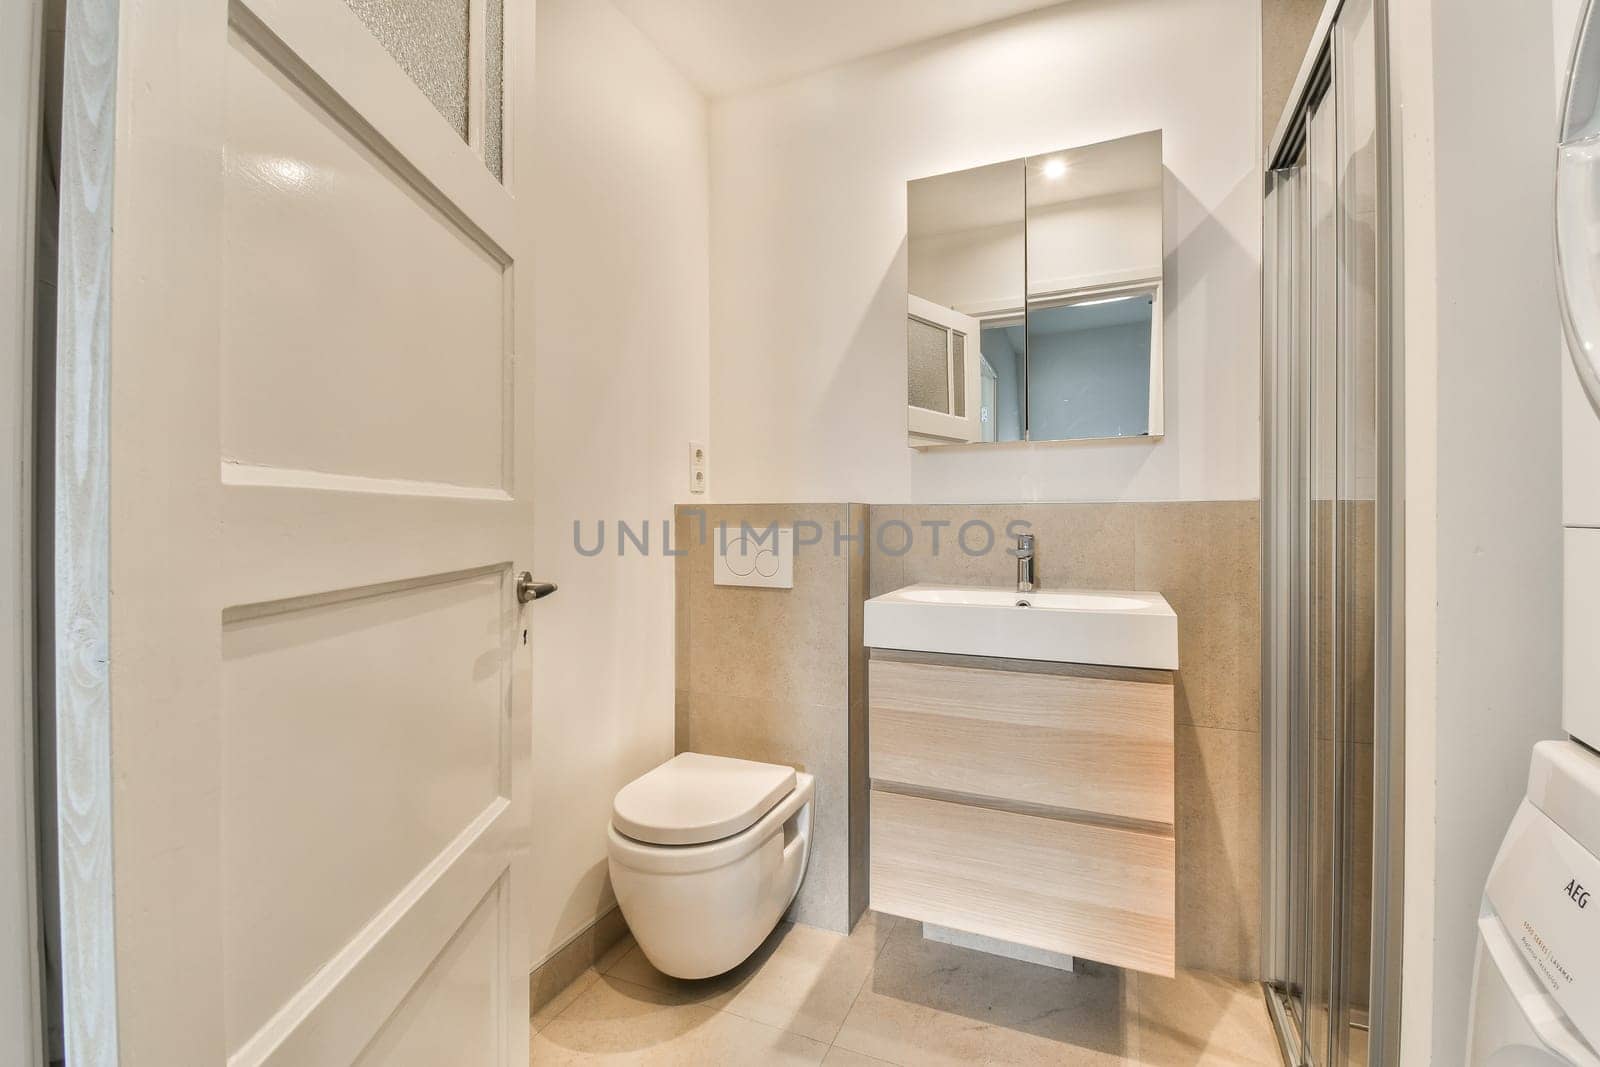 a bathroom with a toilet, sink and mirror on the wall next to the washer in the shower stall